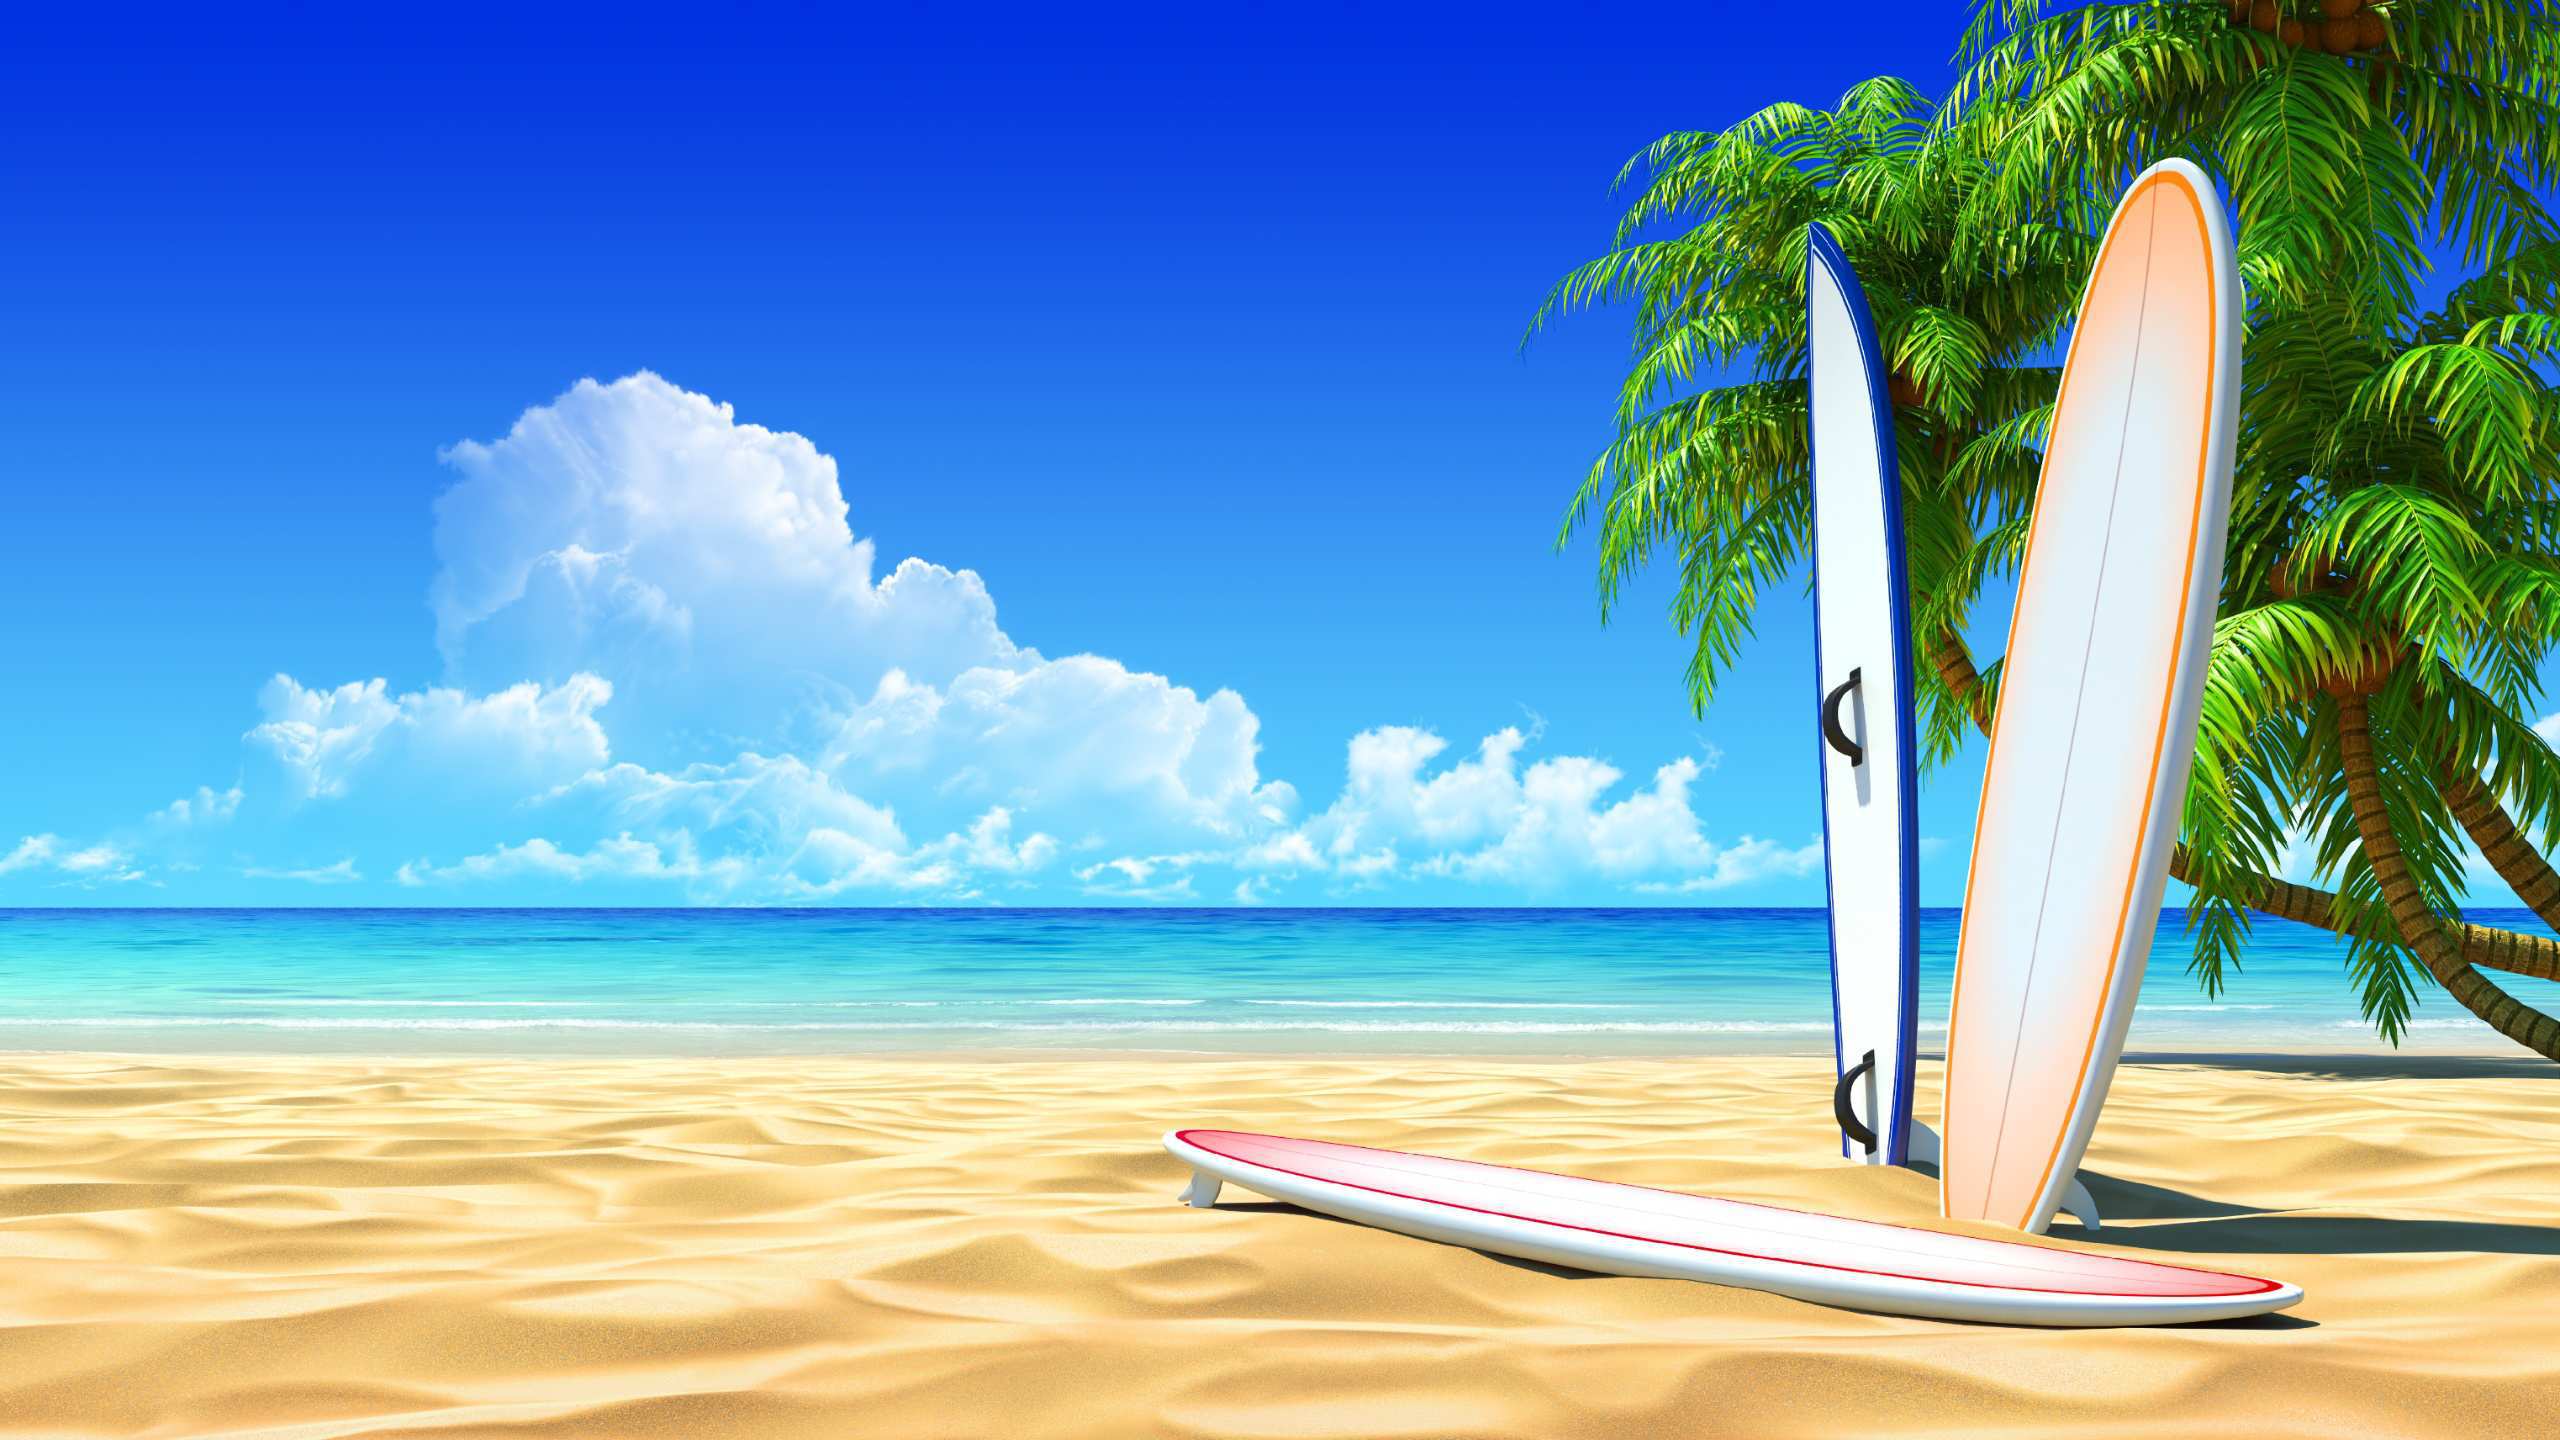 Surfing Wallpapers and Screensavers